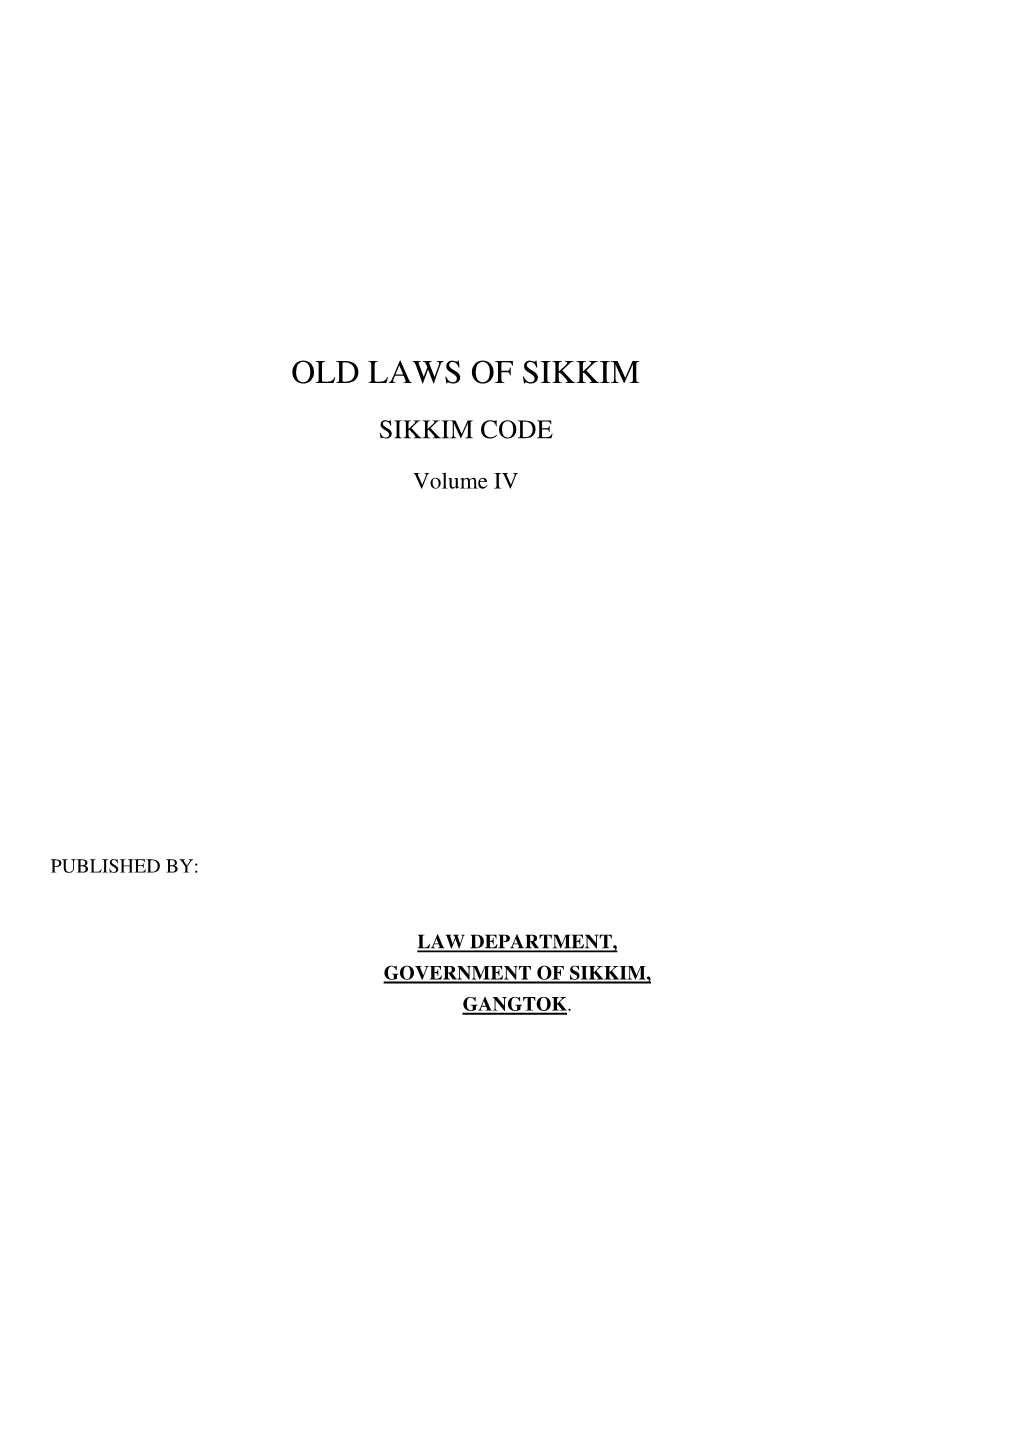 Old Laws of Sikkim